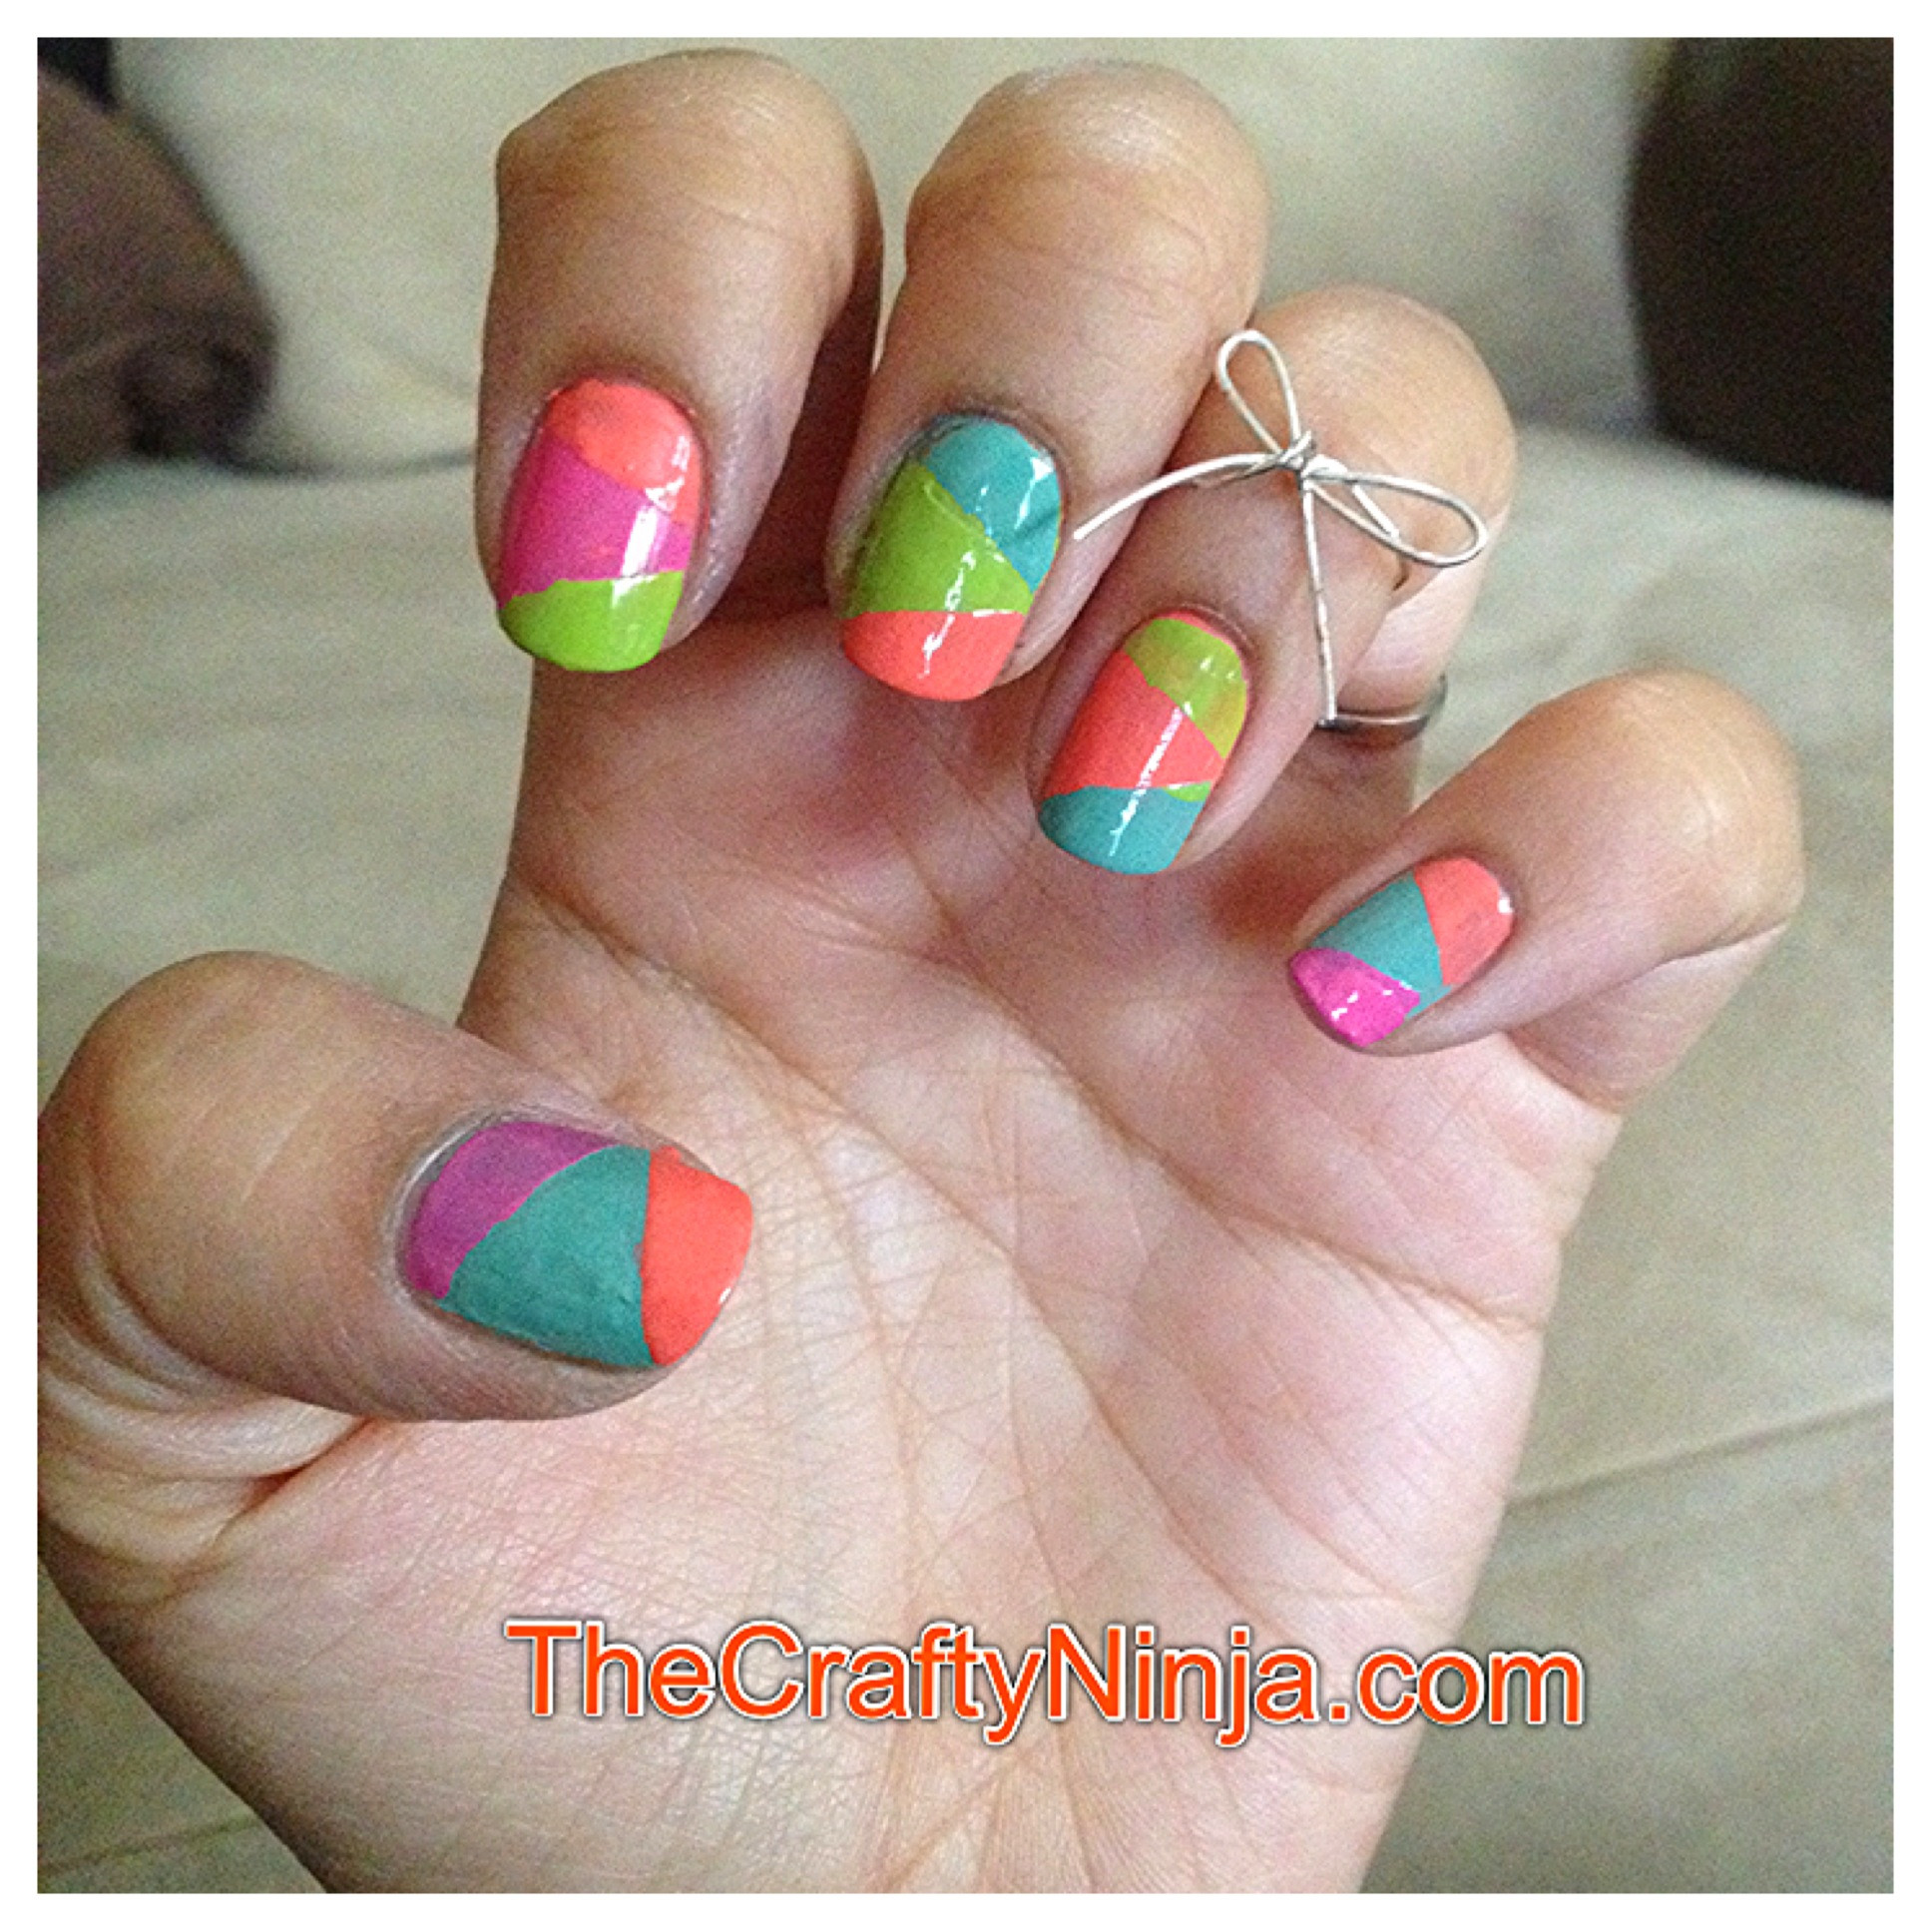 Nail Designs Using Tape
 301 Moved Permanently